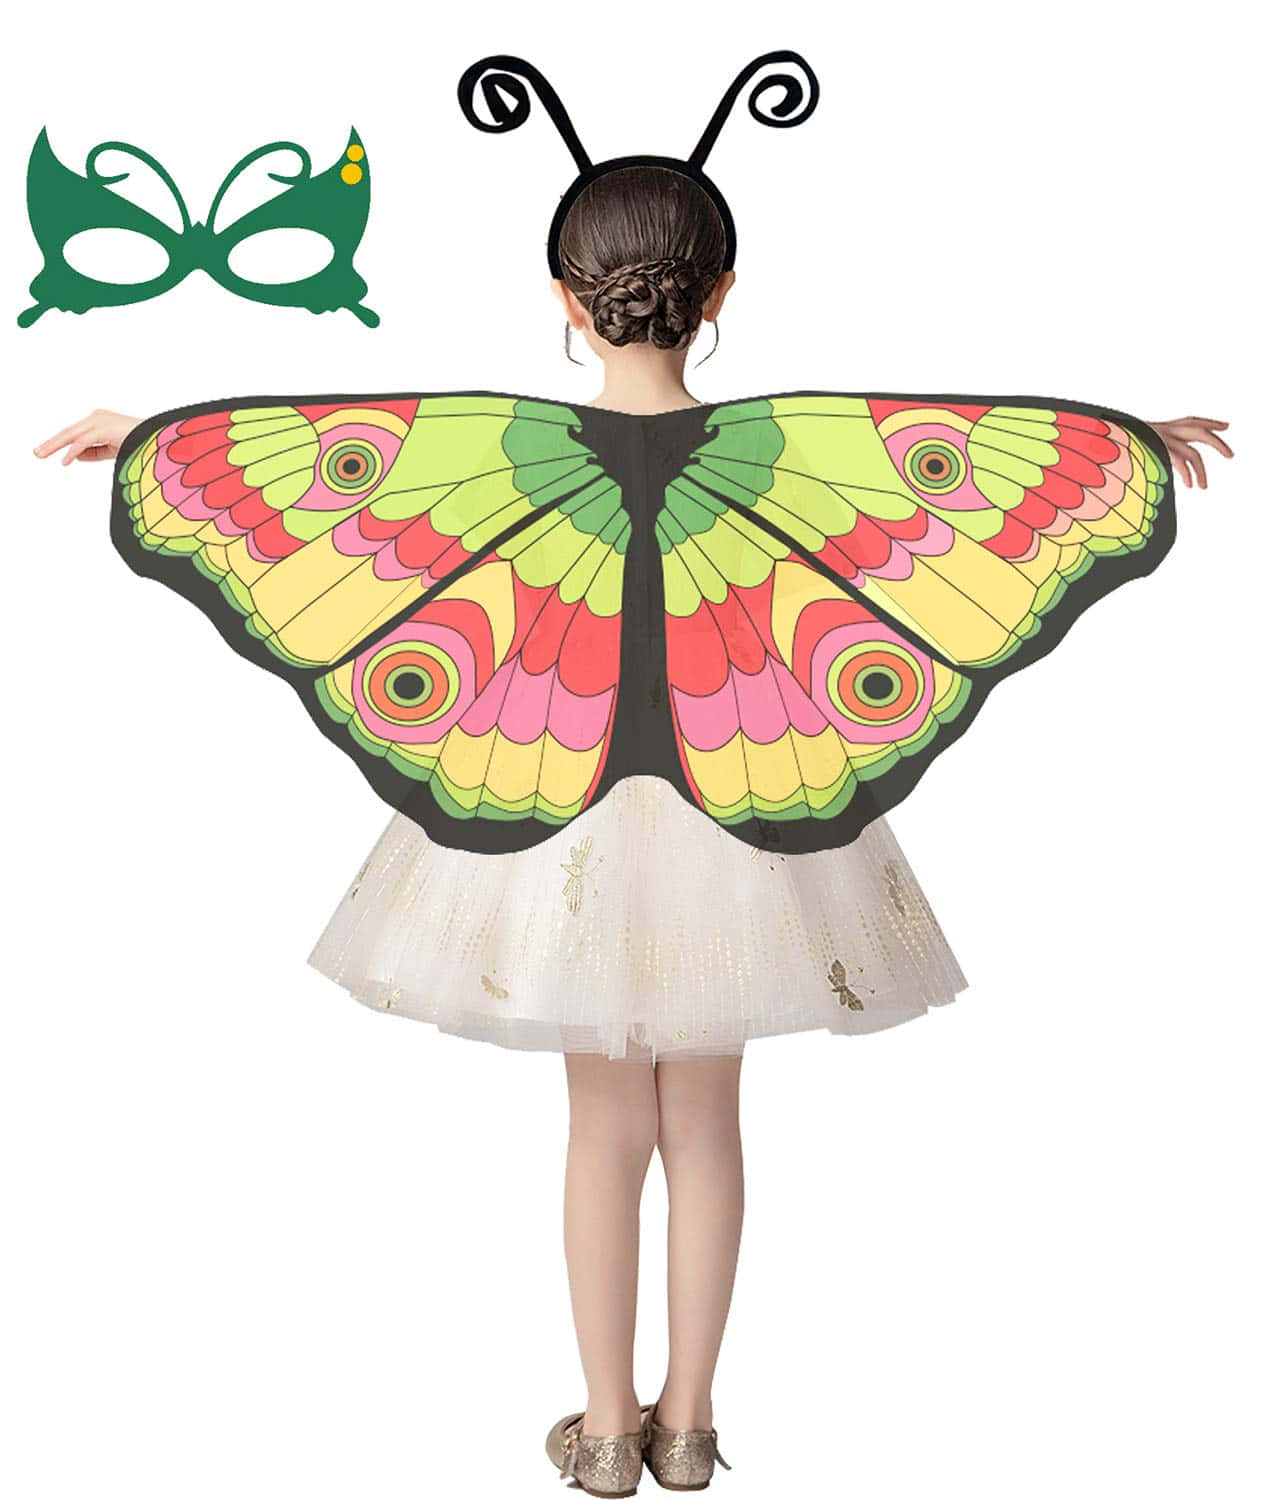 Be Bold, Be Different: Make a Statement with Butterfly Wing Dress" Wallpaper